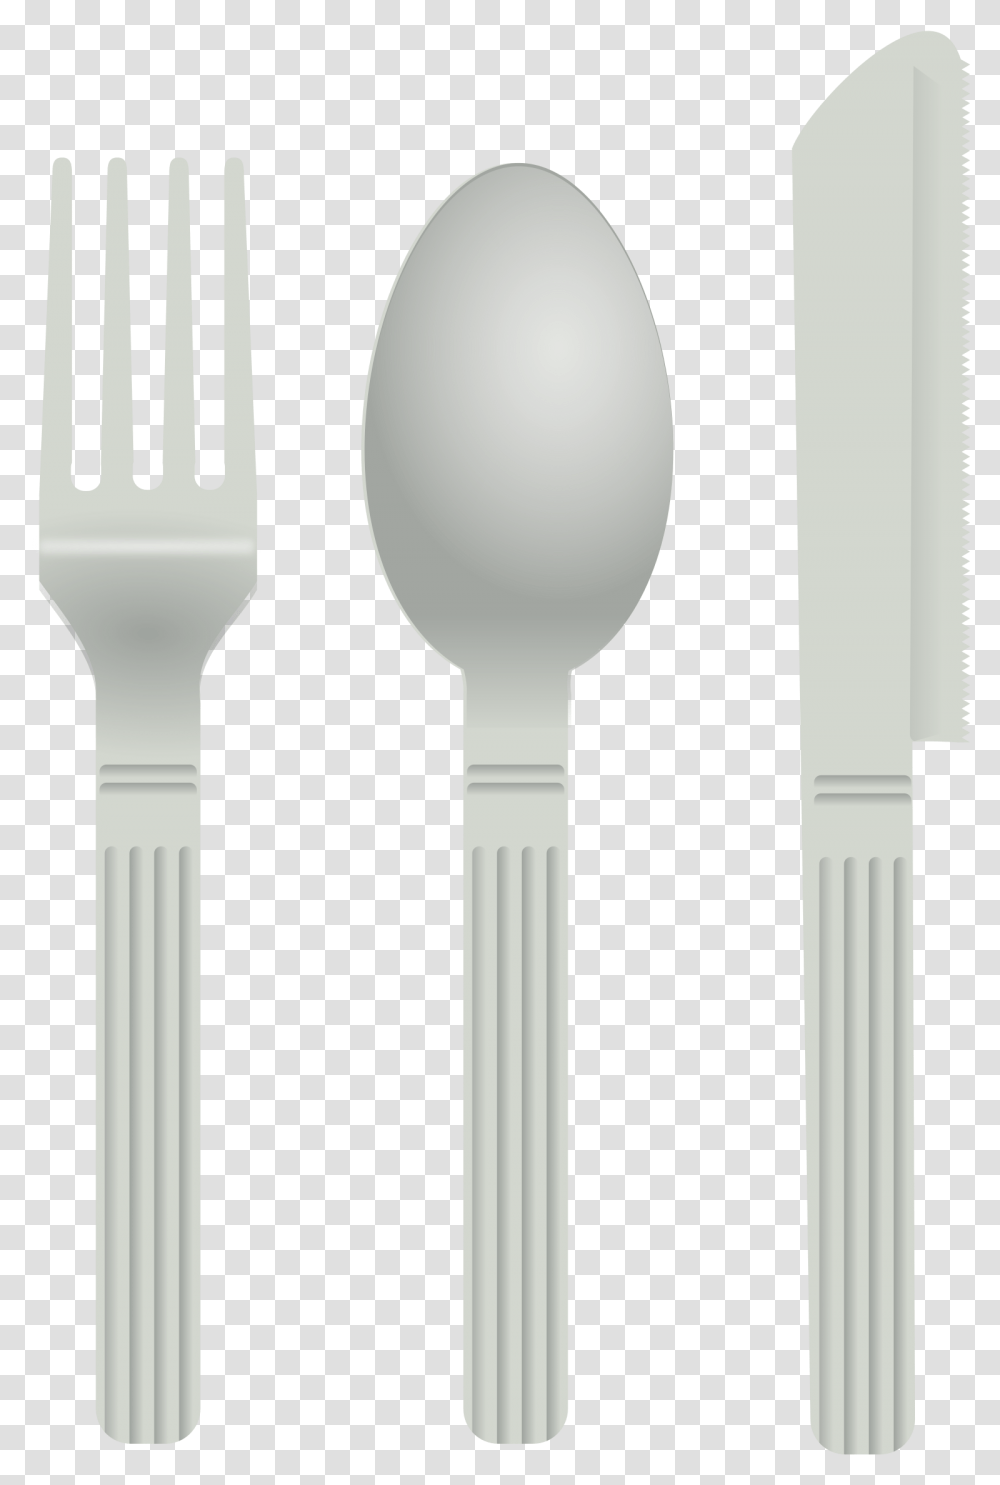 Fork And Spoon Clip Arts Spoon Clip Art, Cutlery, Road Transparent Png